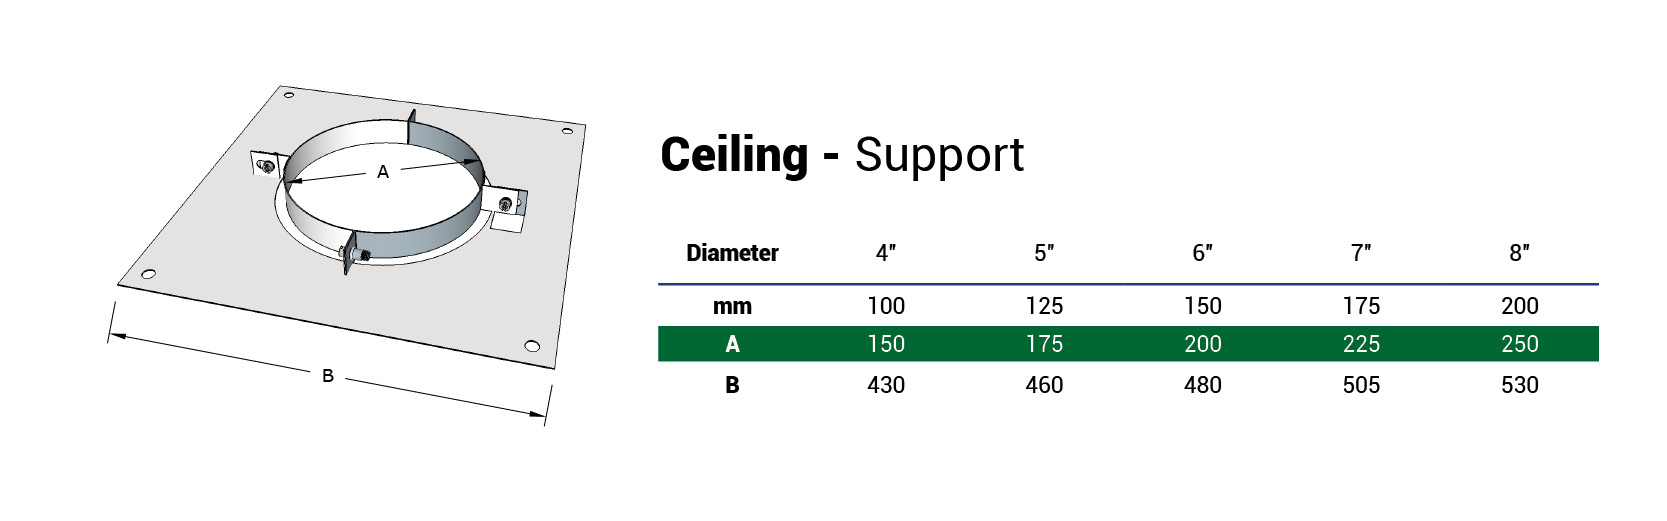 Ceiling support